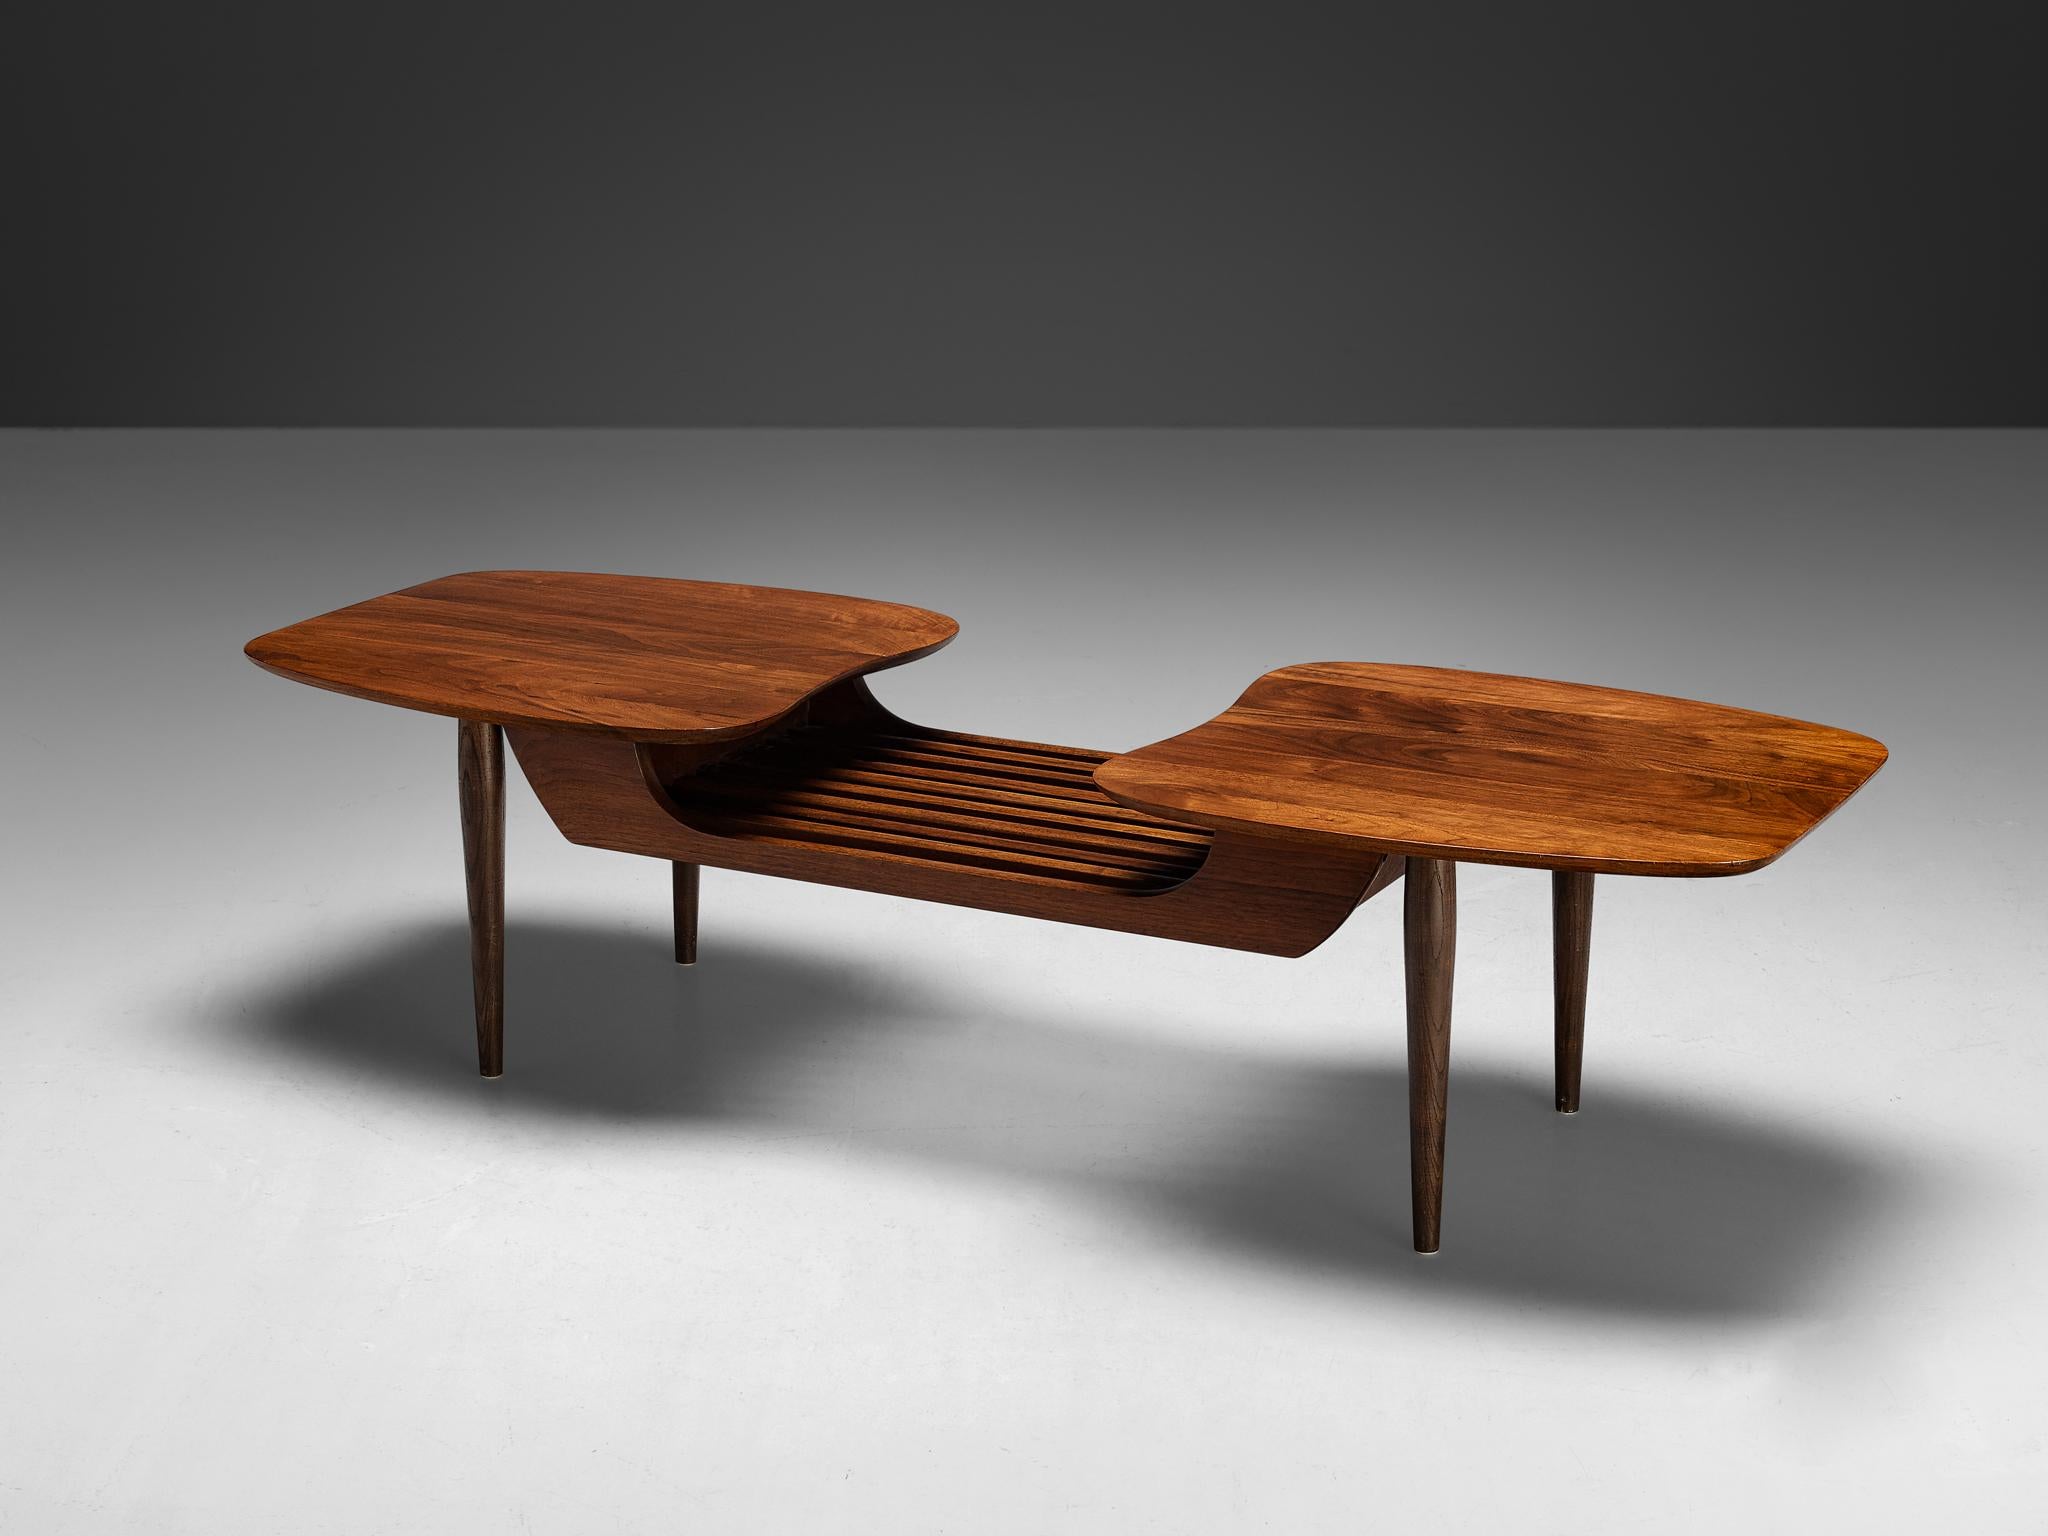 Coffee table, walnut, United States, 1960s

Interesting coffee table in walnut made in the United States. This design boasts two amorphous slab tabletops. Underneath the tops are numerous close slats, it forms a harmonious blend of functionality and